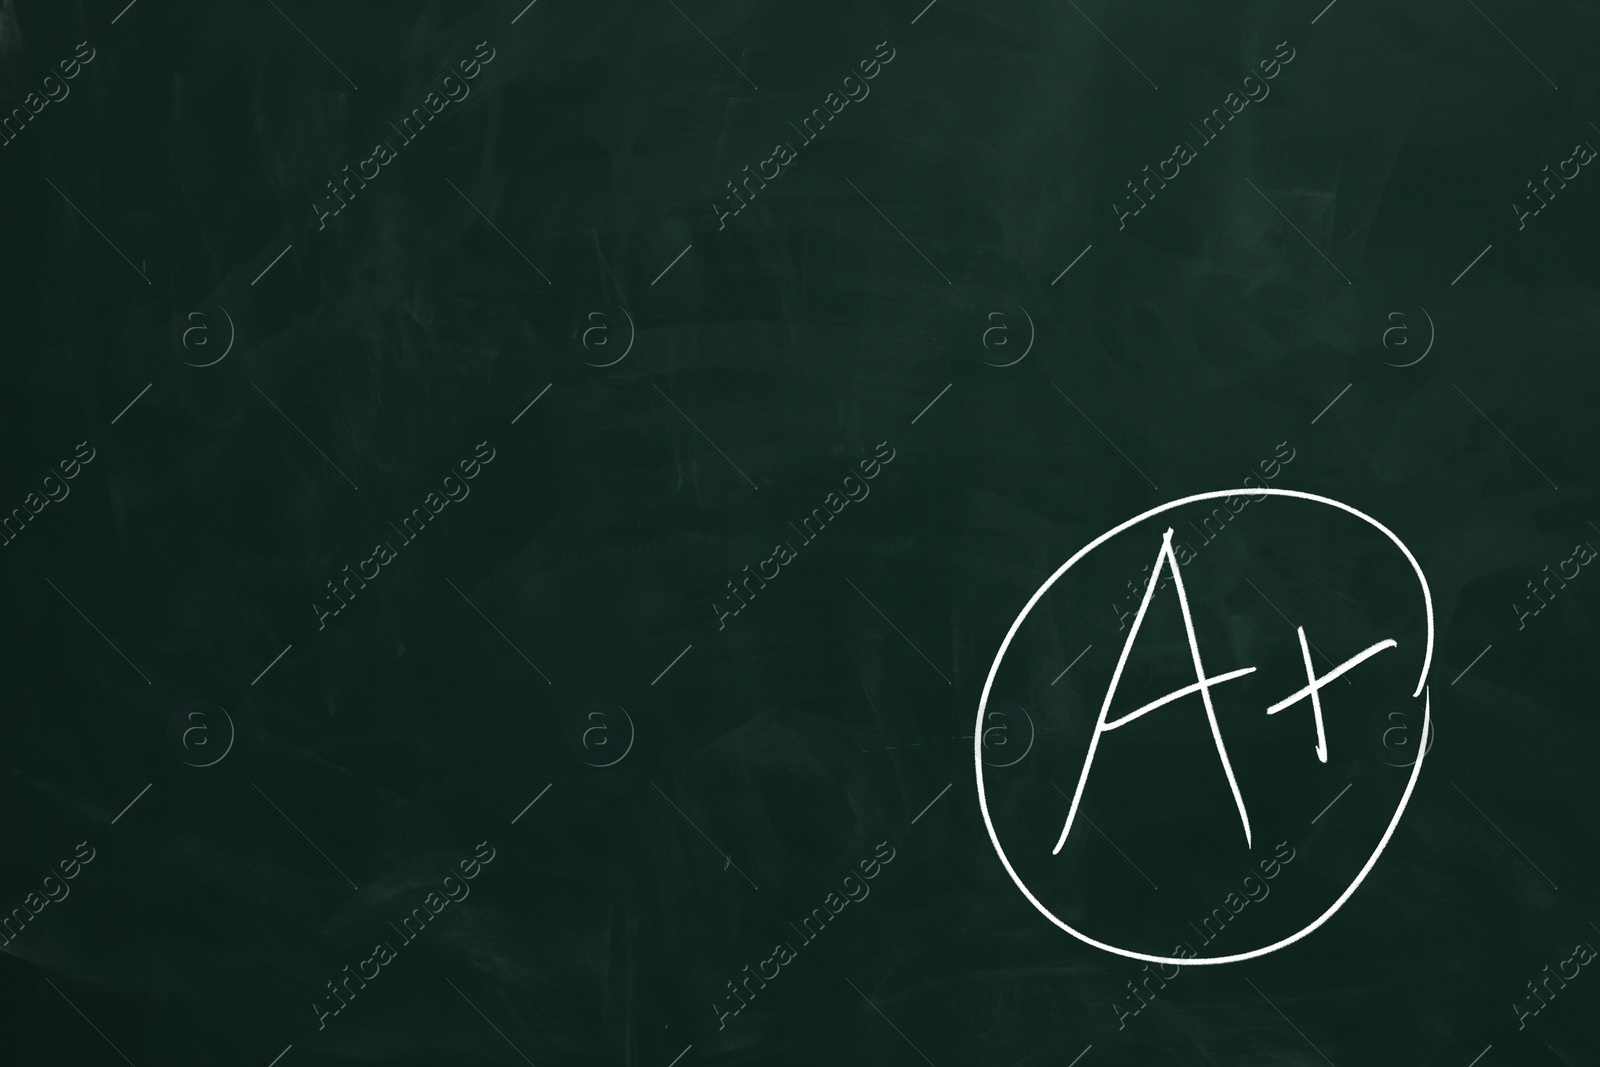 Image of School grade. Letter A with plus symbol on green chalkboard